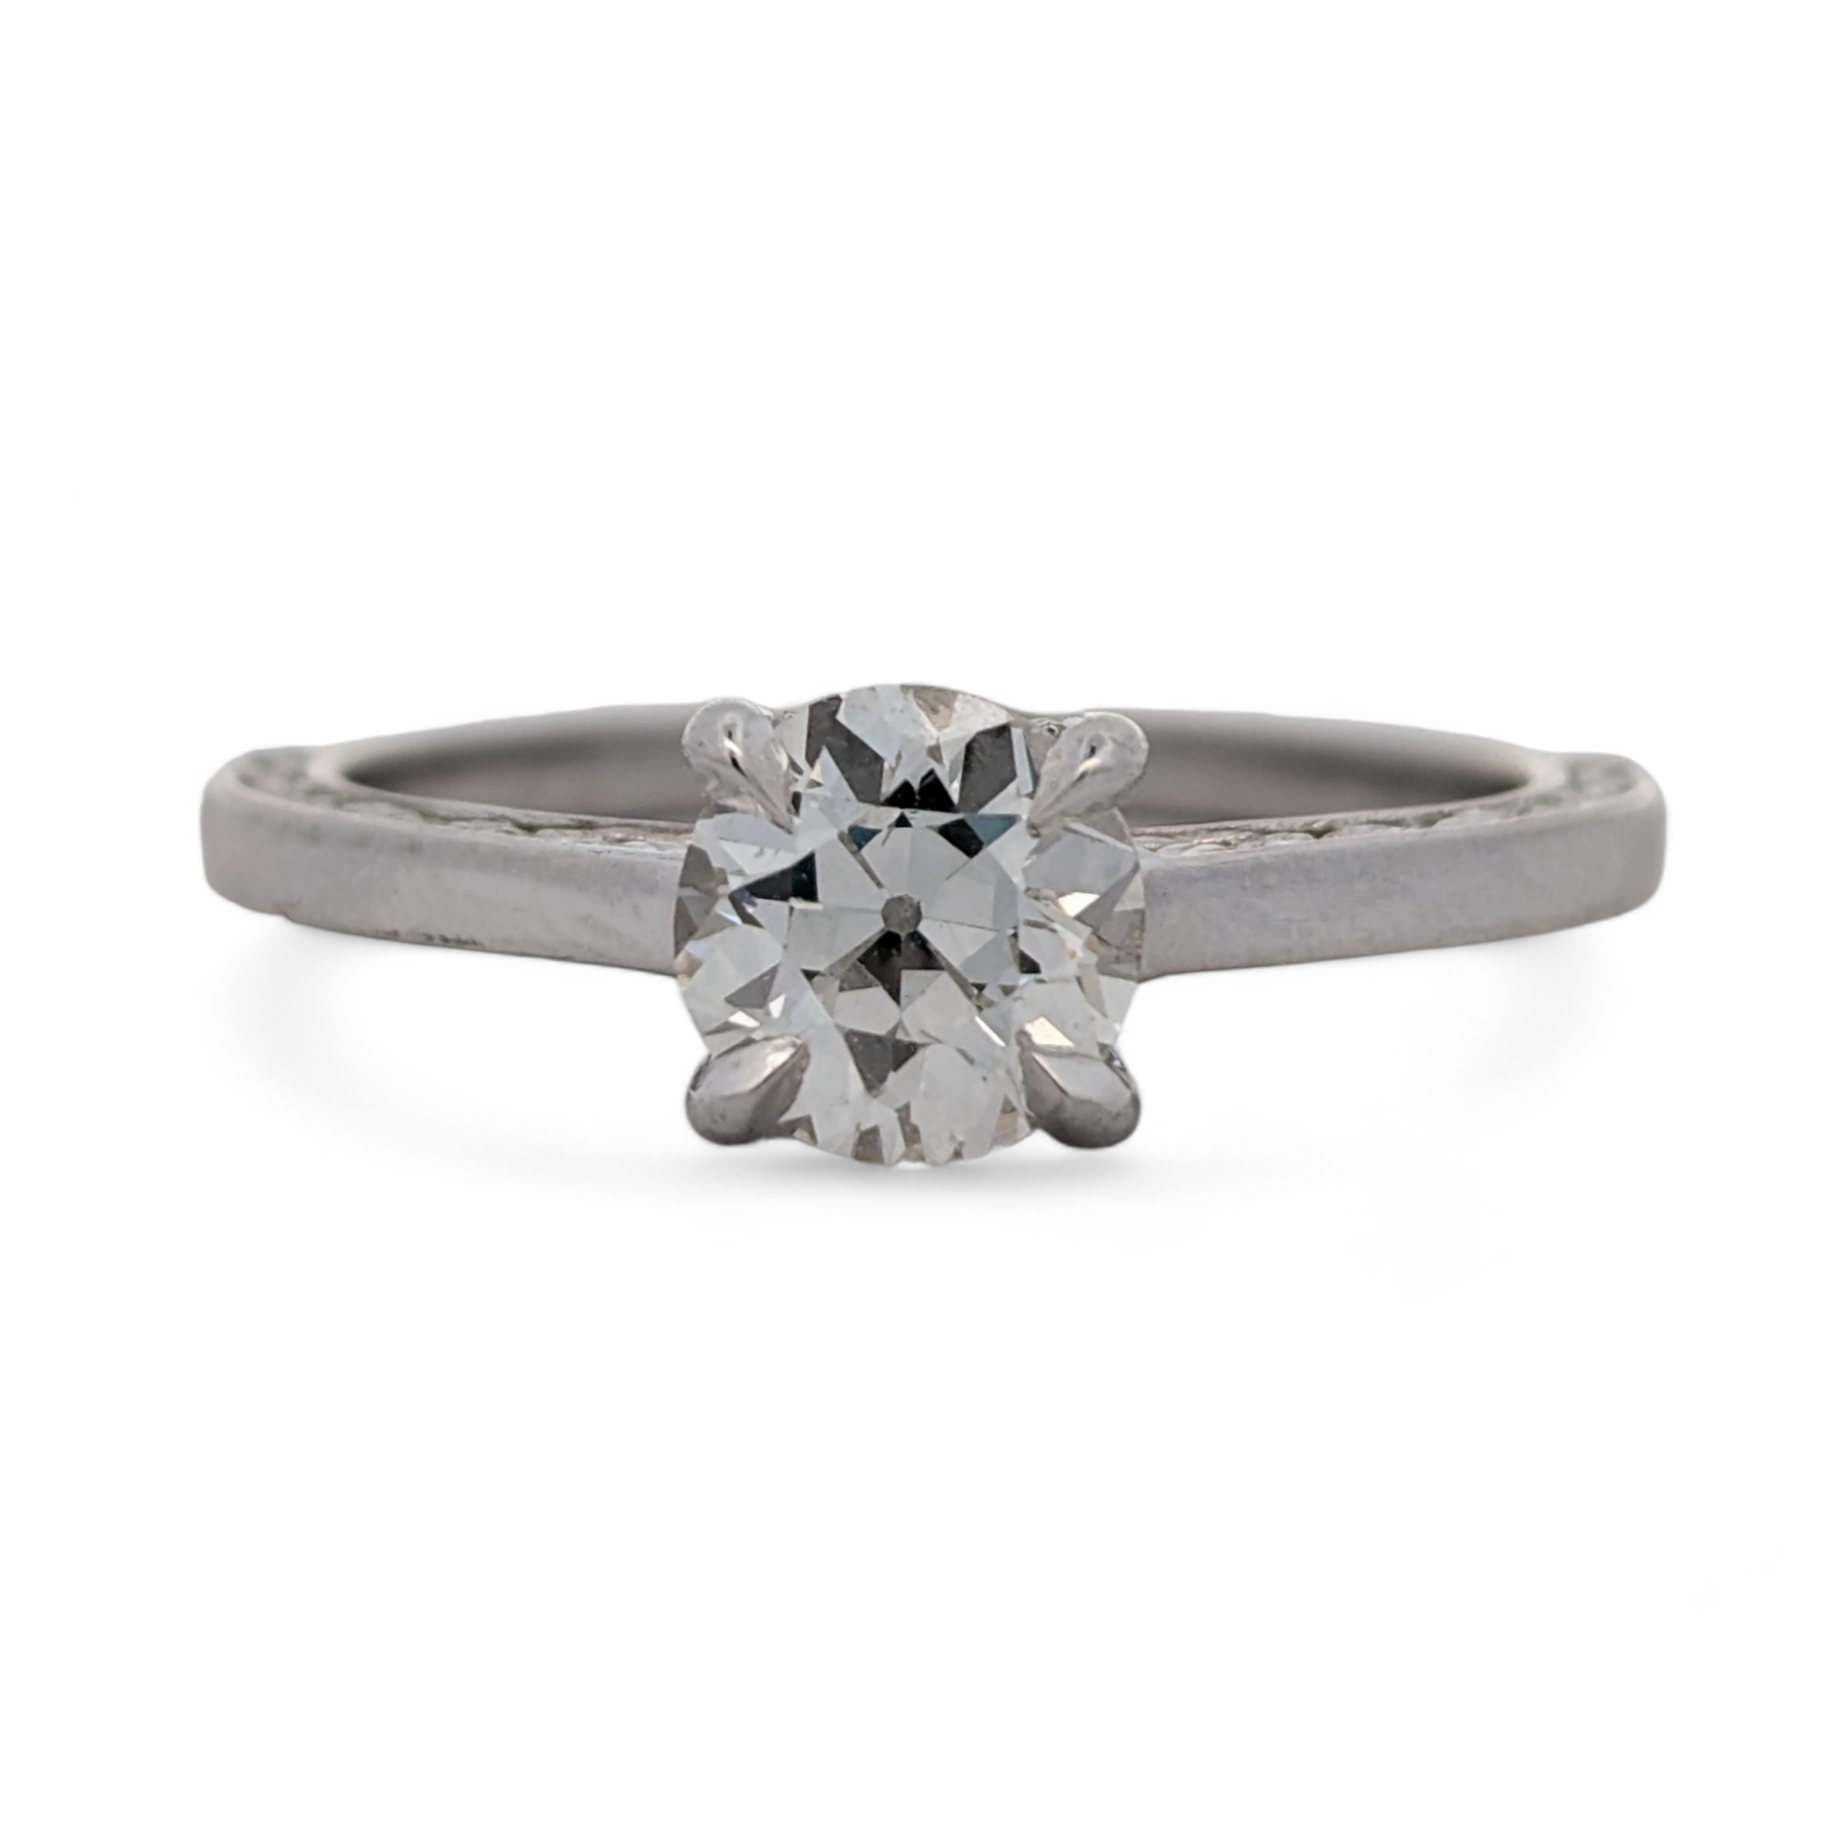 Platinum Vintage Inspired Engagement Ring with Old Euro Cut Diamond